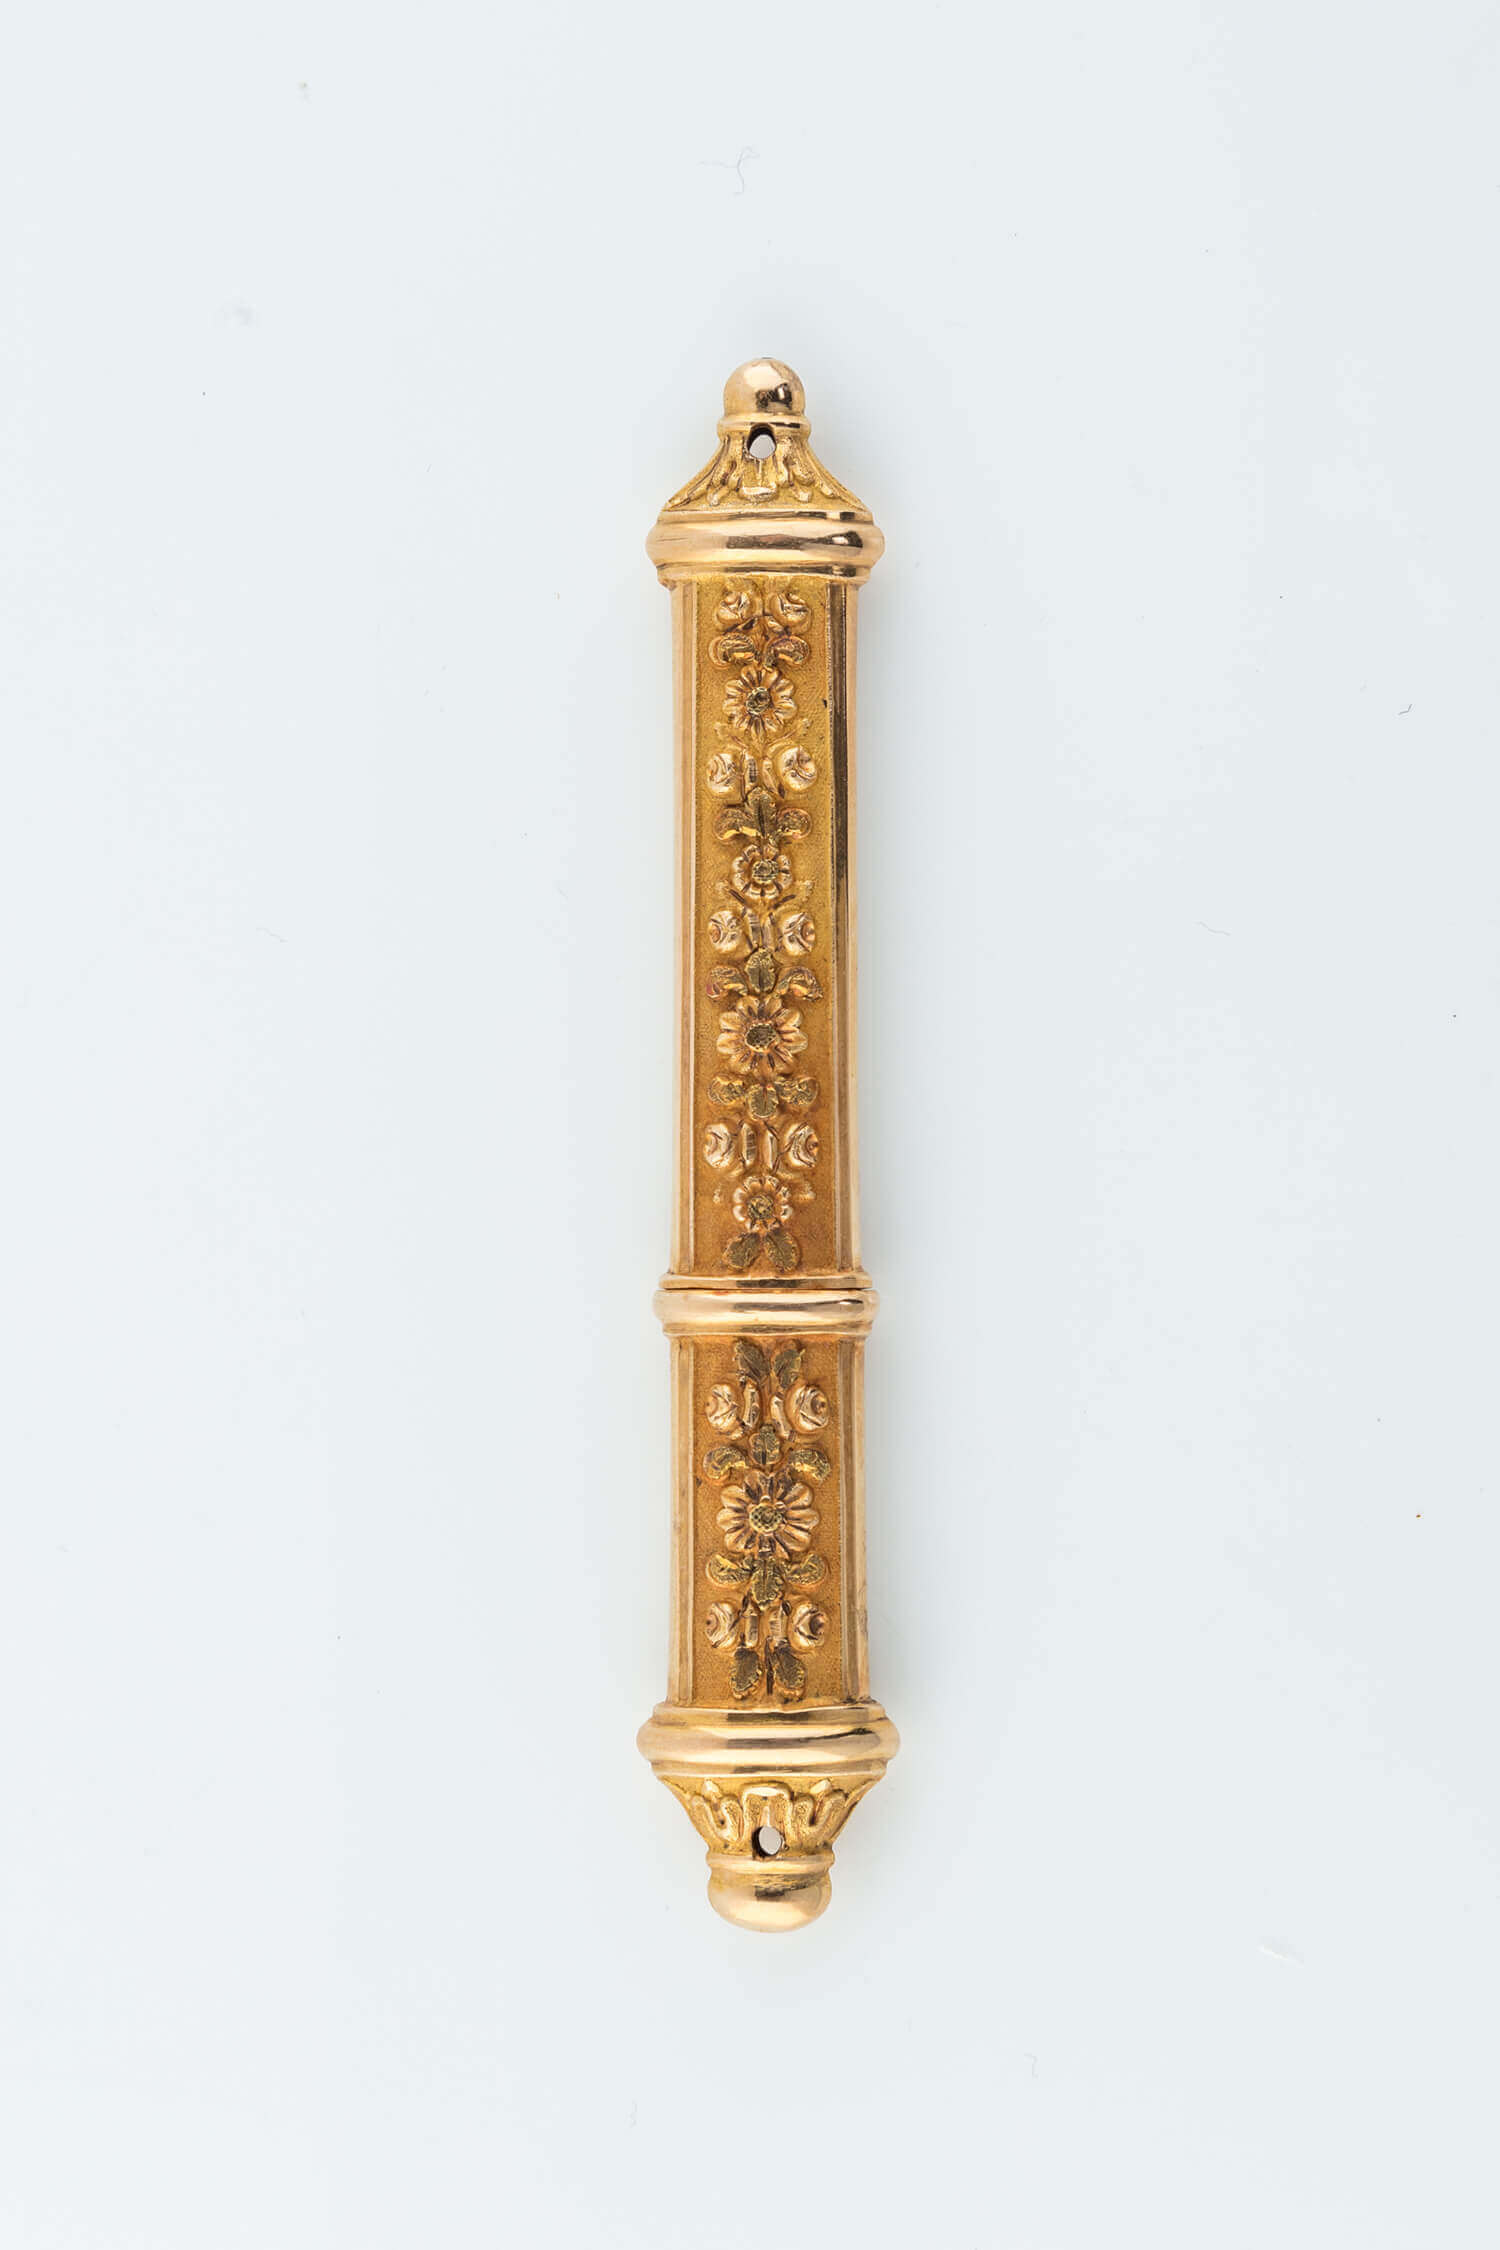 092. A GOLD MEZUZAH REPORTED TO BE OWNED BY THE OTTOLENGHI FAMILY